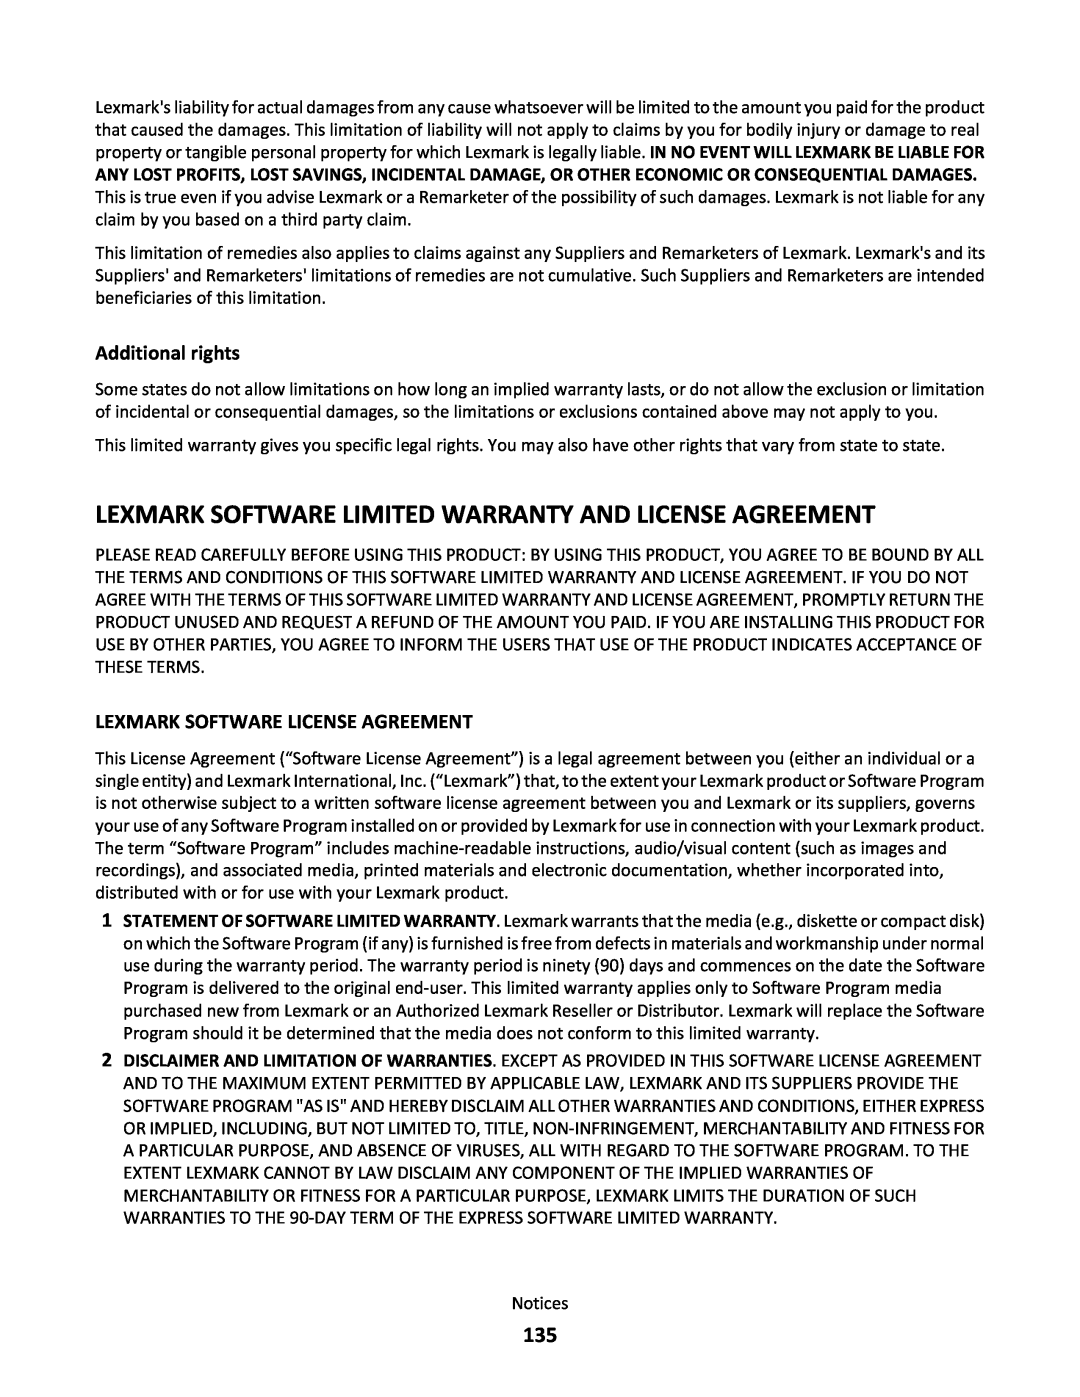 Lexmark 34S5164, 34S0100, 34S0305, 34S0300 manual Lexmark Software Limited Warranty And License Agreement, Additional rights 